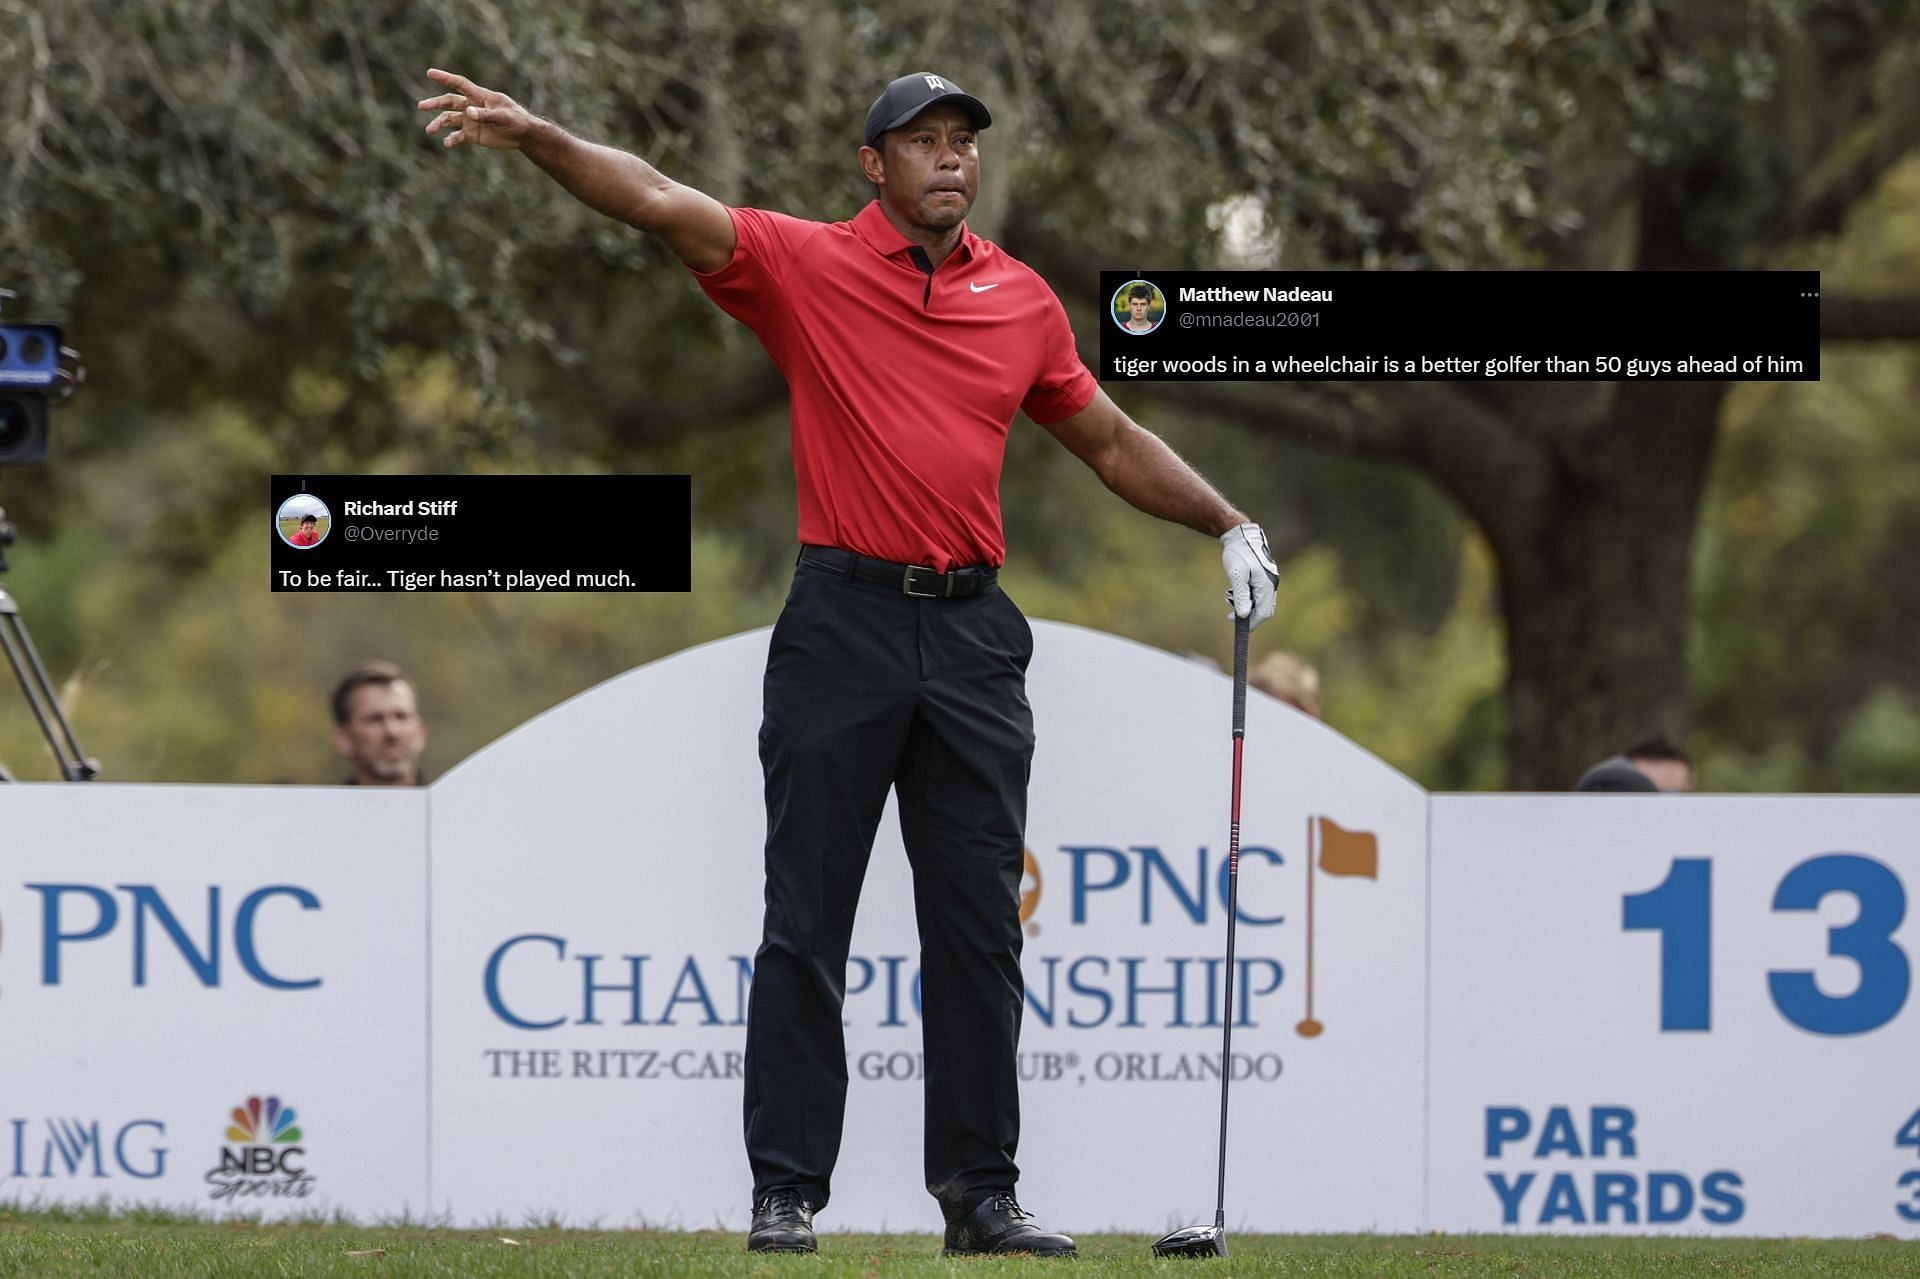 “To be fair… Tiger Woods hasn’t played much” Fans react to Tiger